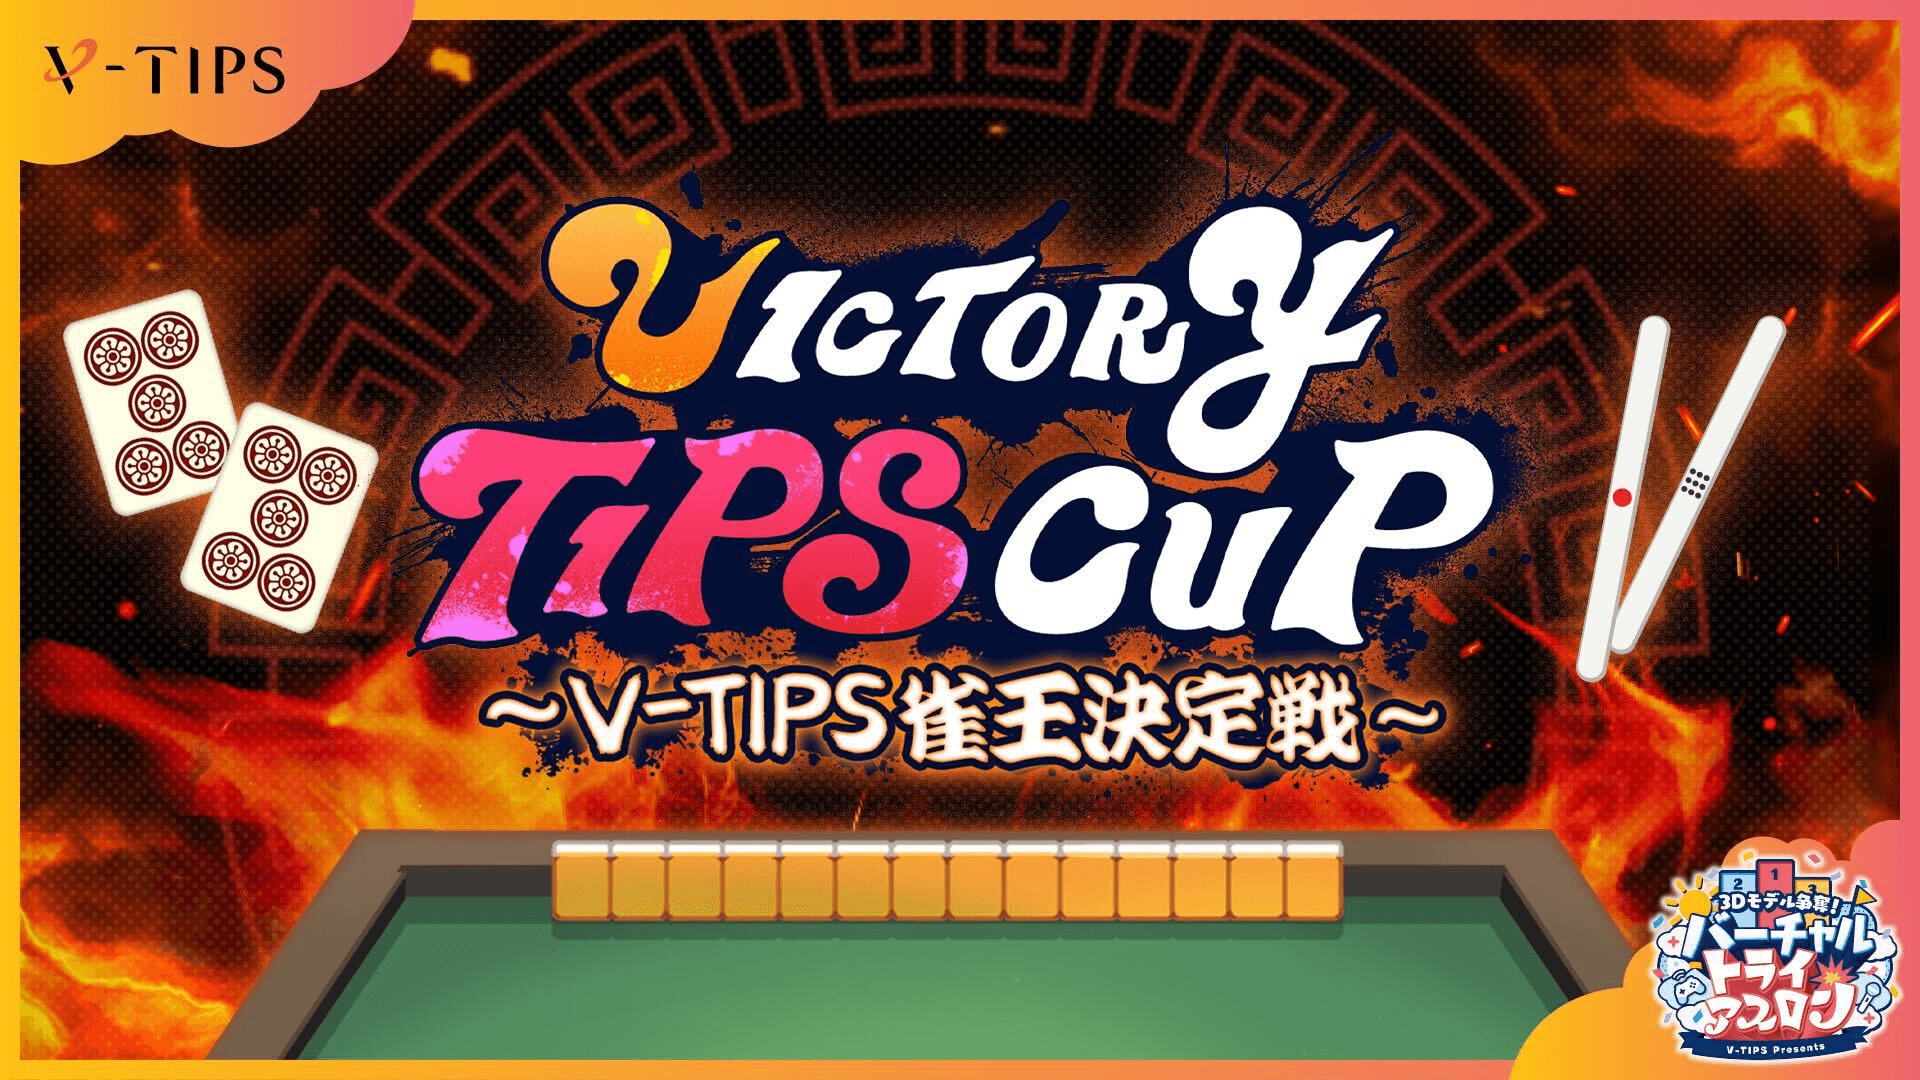 VICTORY TIPS CUP～V-TIPS雀王決定戦～の見出し画像